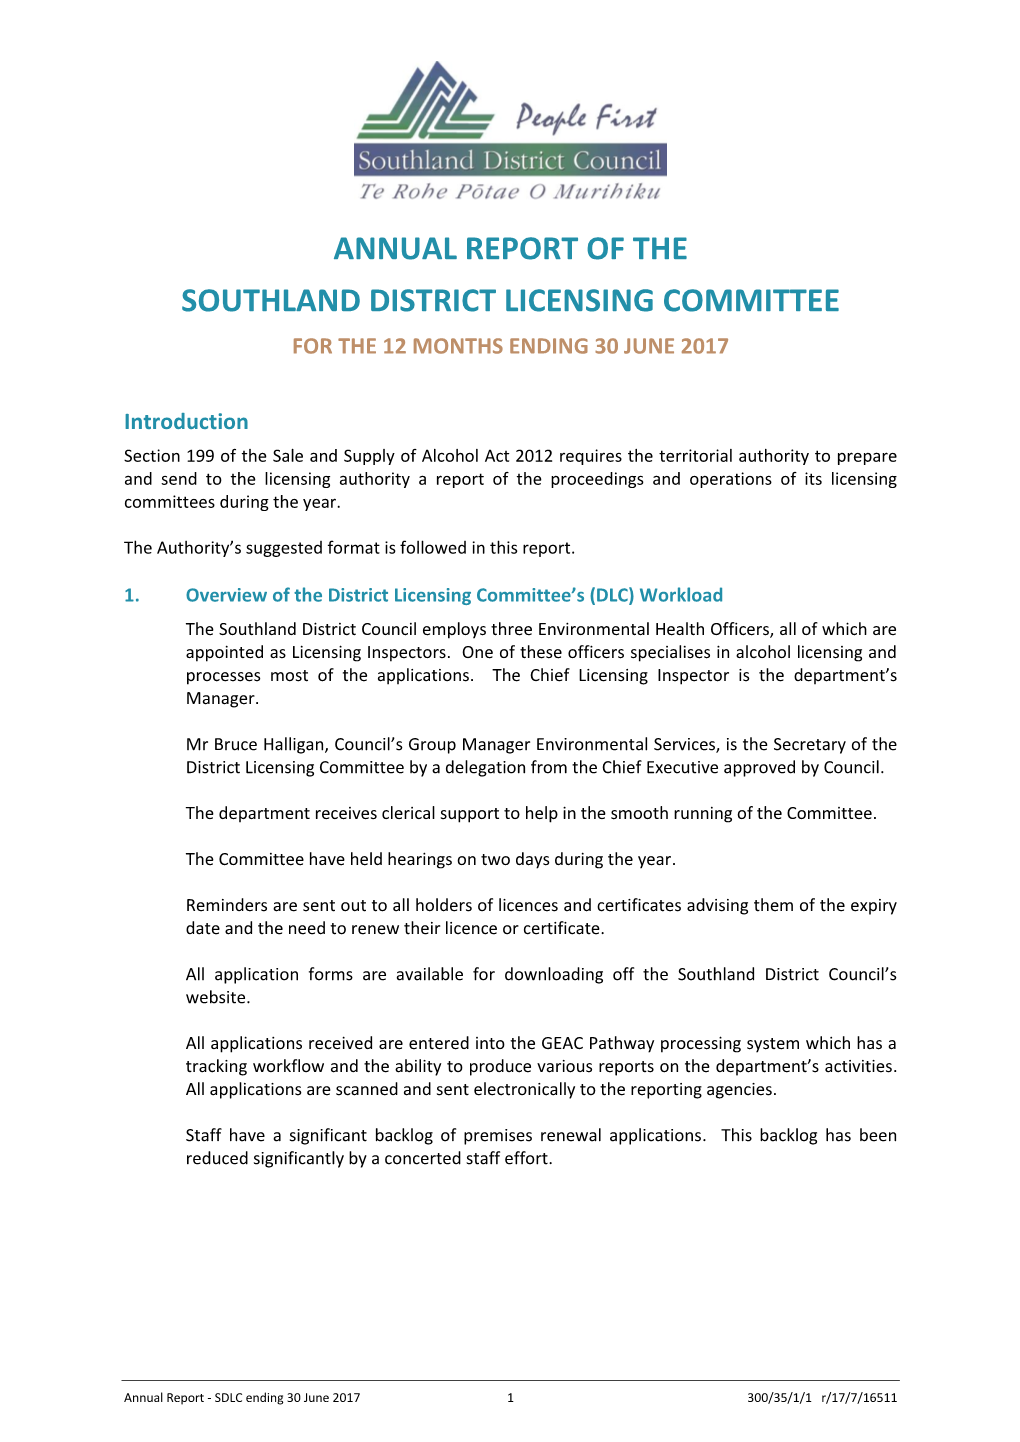 Annual Report of the Southland District Licensing Committee for the 12 Months Ending 30 June 2017